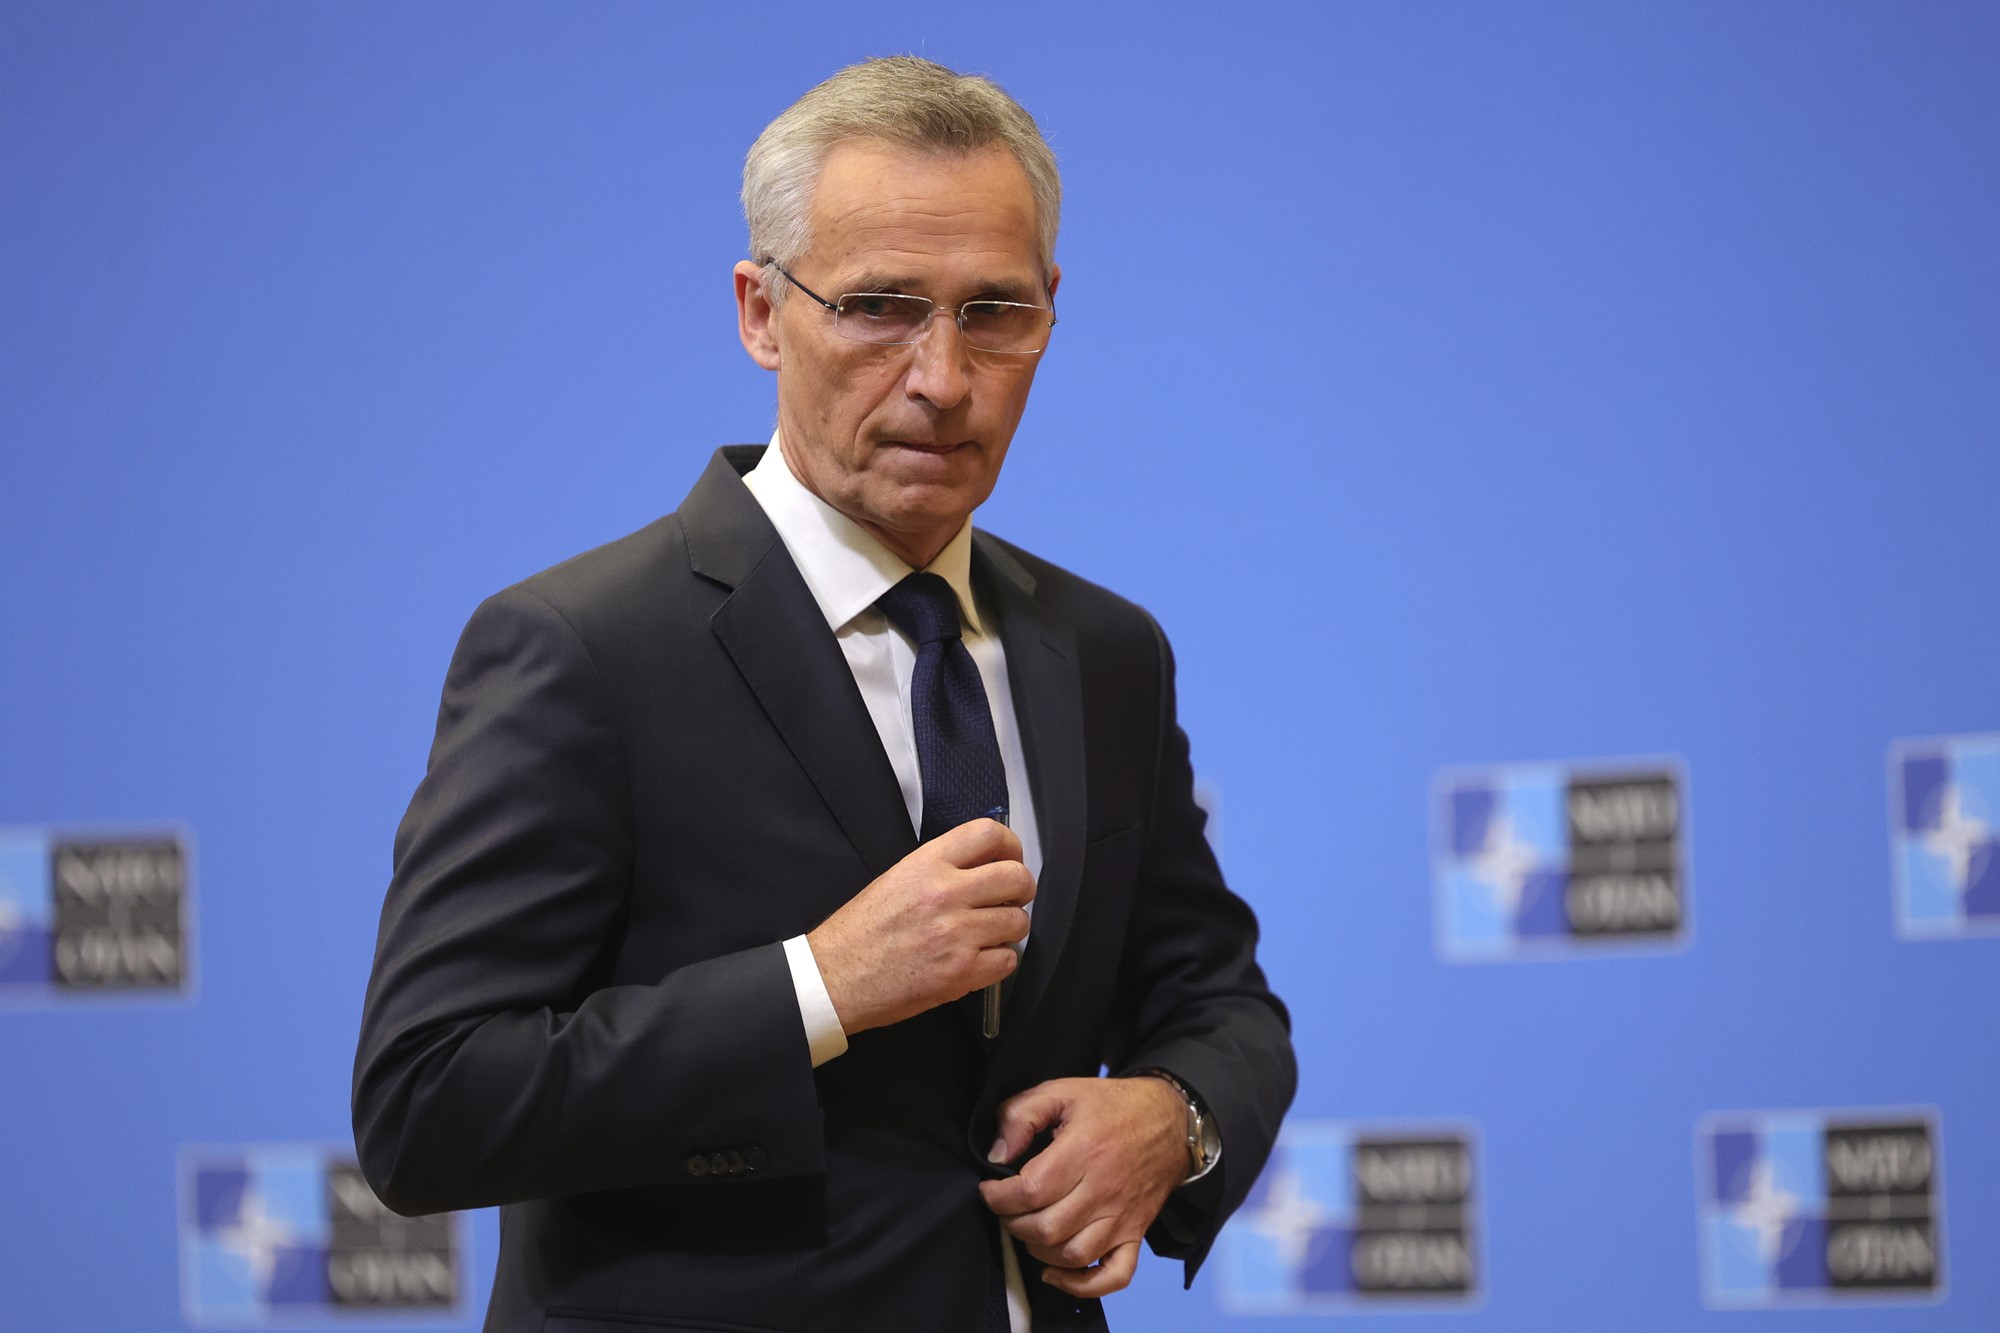 Jens Stoltenberg adjusts his suit as he looks pensively in front of a NATO backdrop